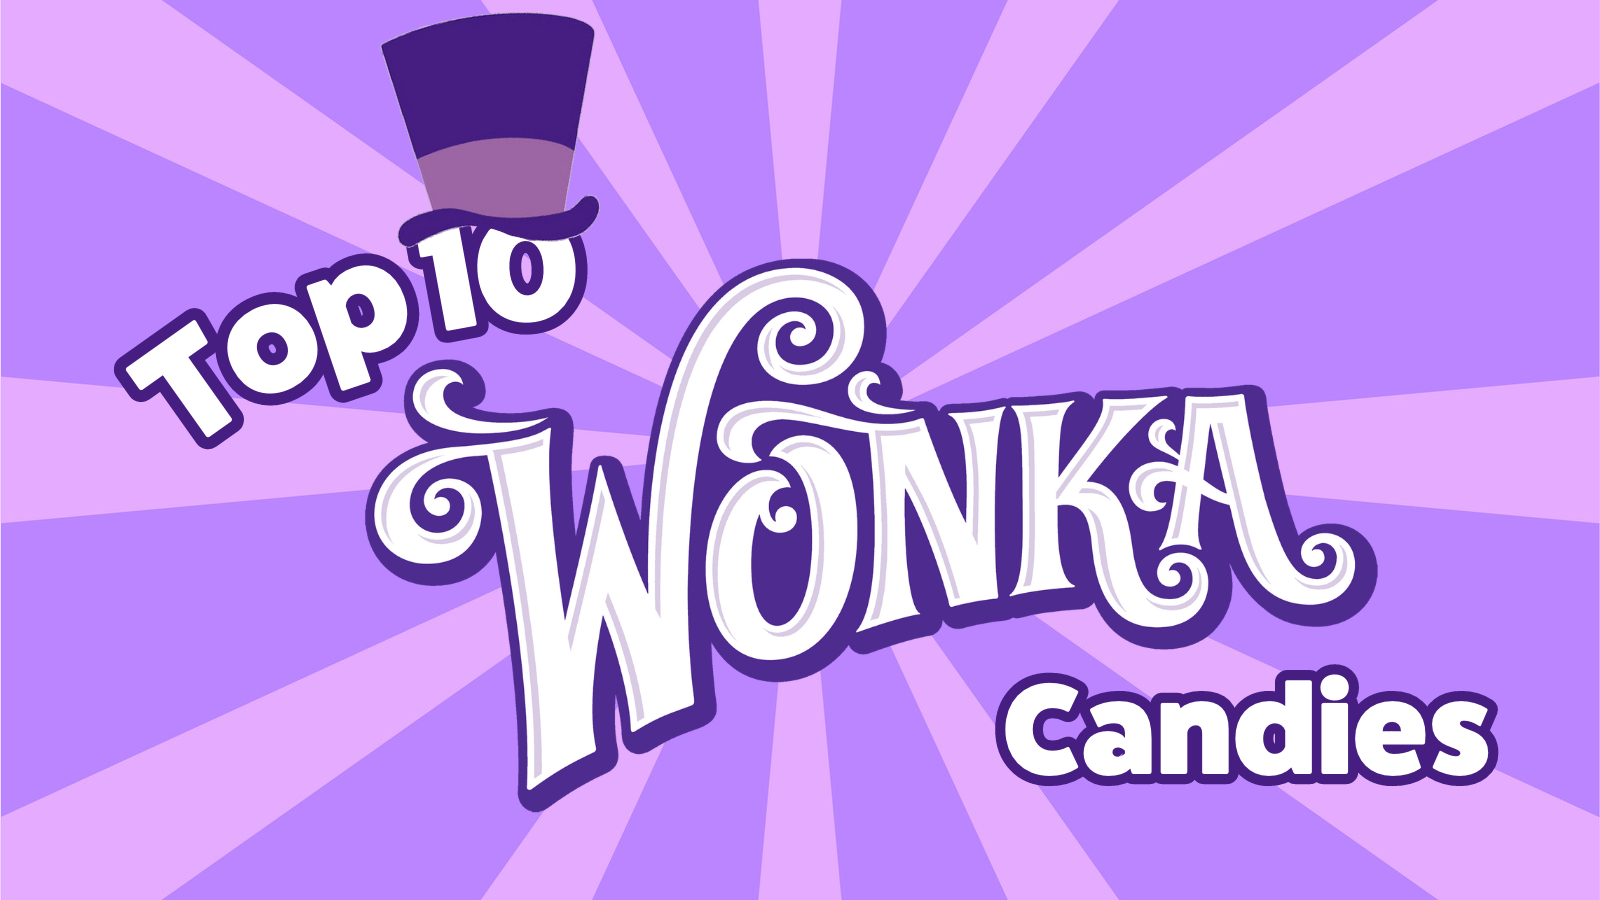 Legendary Candy Inspired by Willy Wonka - Wonka Candy